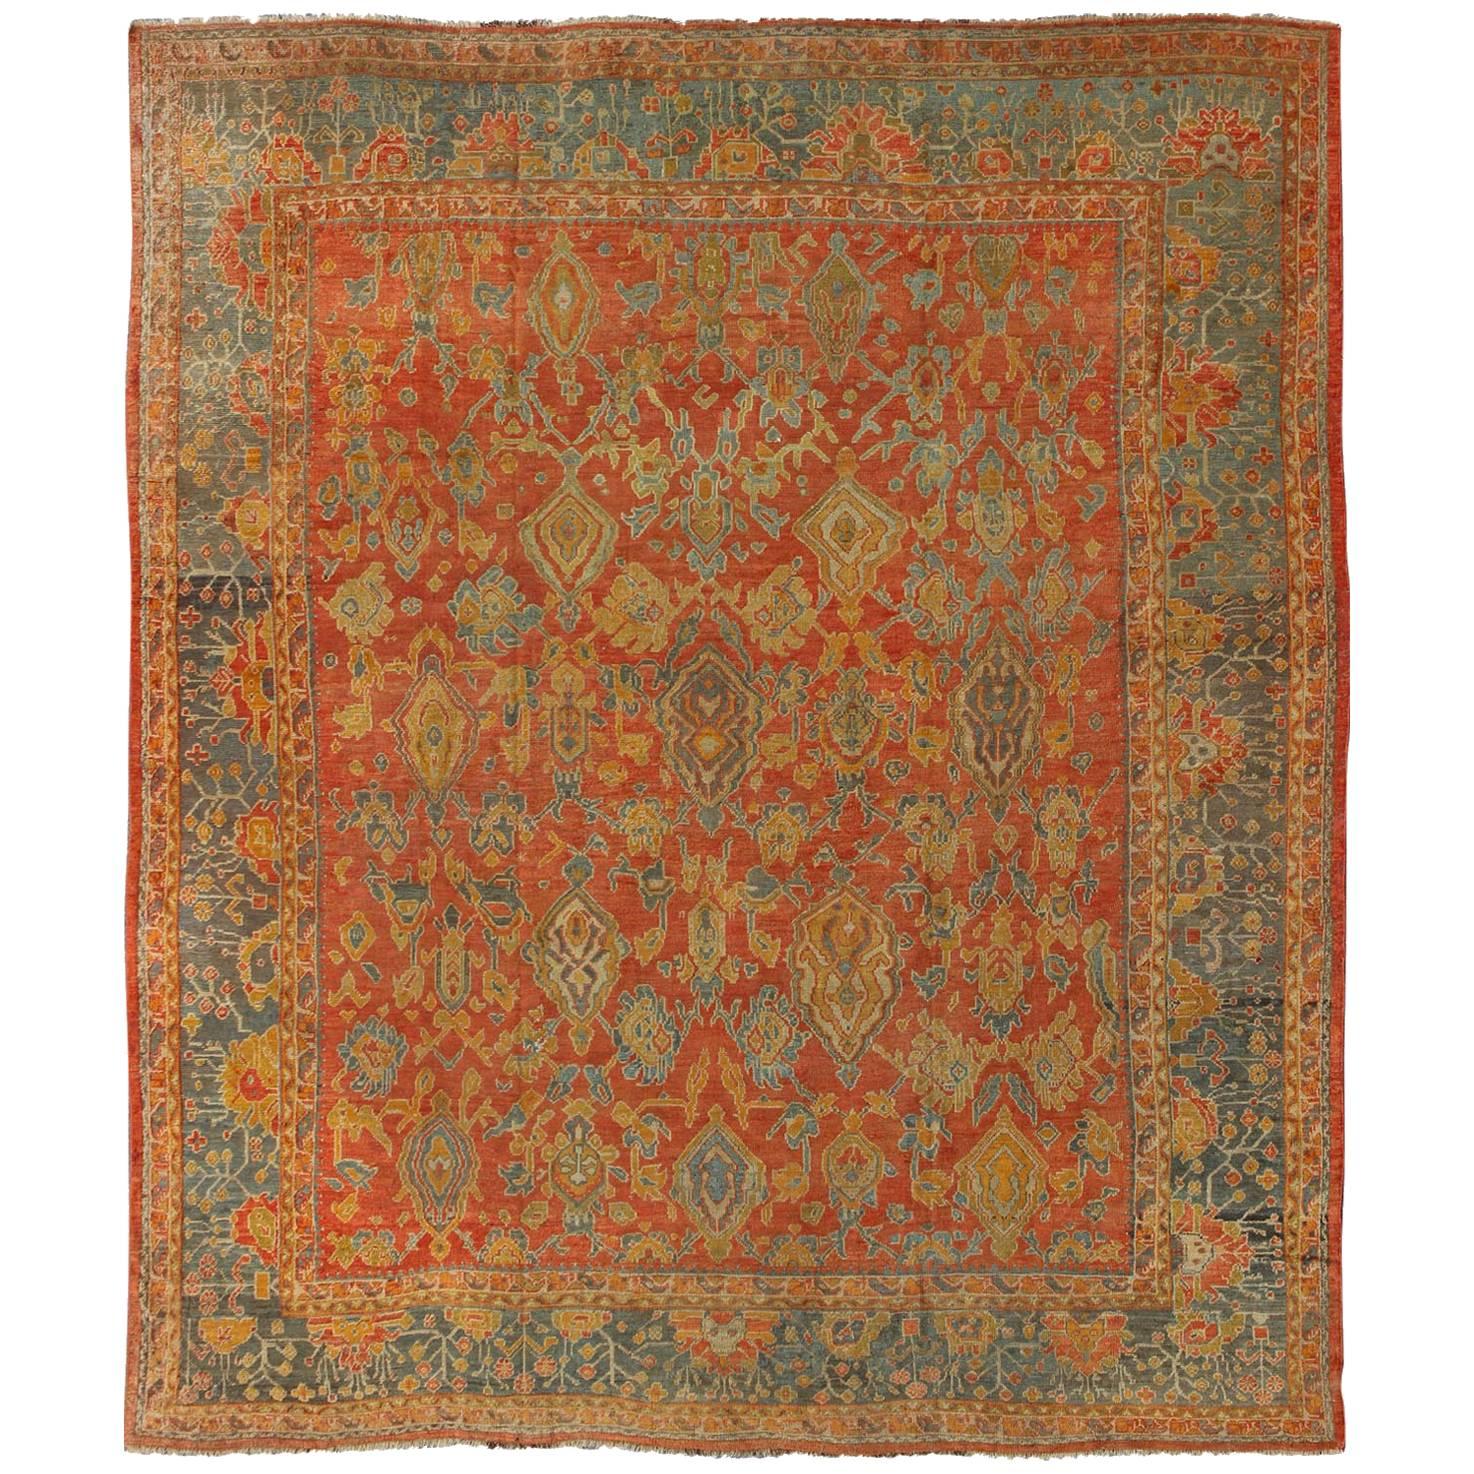 Antique Turkish Oushak Rug in Terracotta With All-Over Flower, Leaves and Vines  For Sale